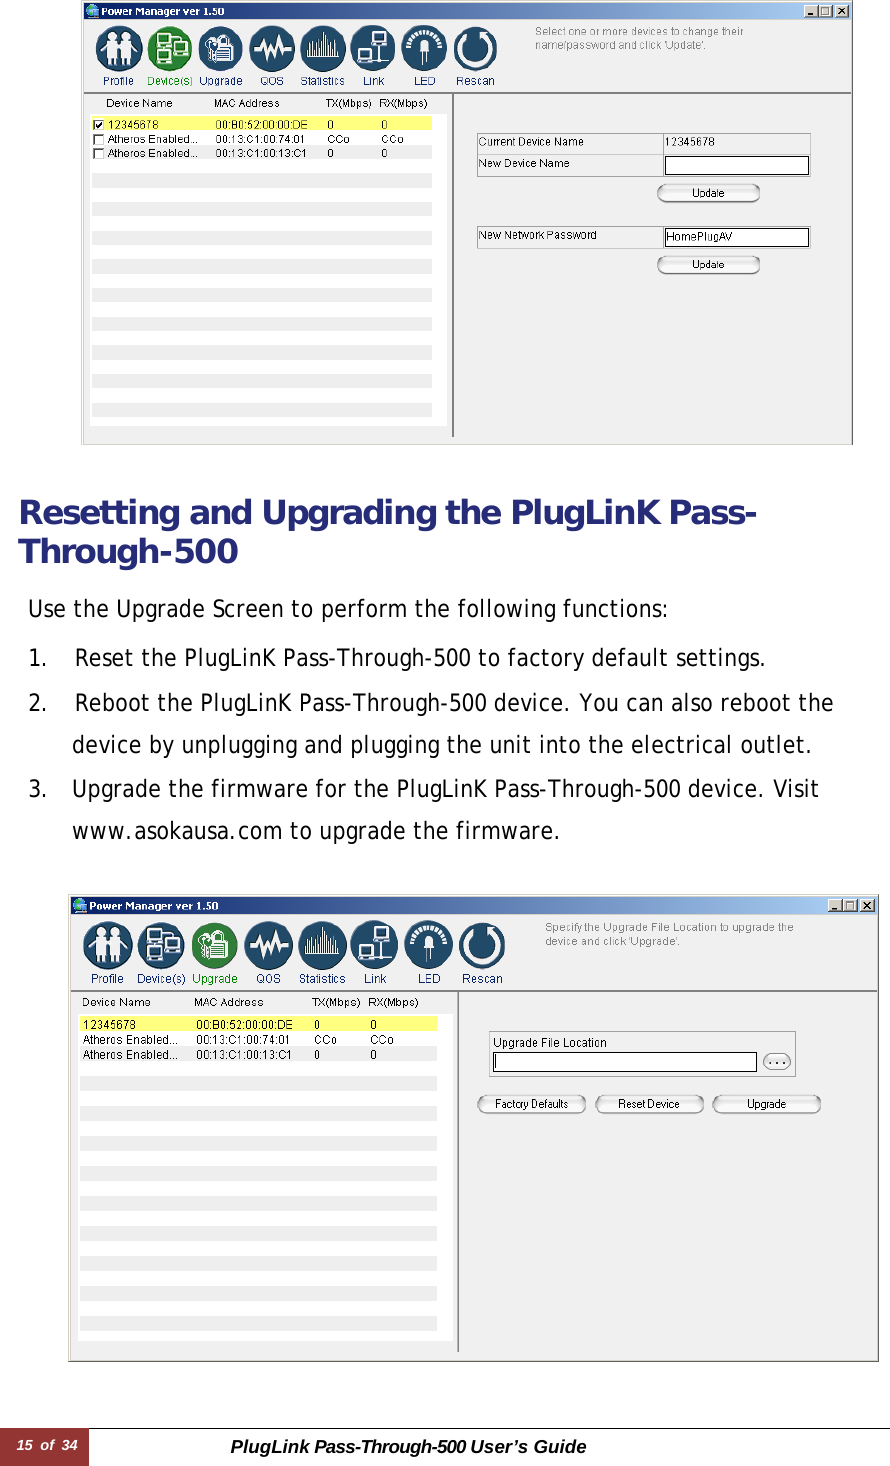 15 of 34 PlugLink Pass-Through-500 User’s Guide       Resetting and Upgrading the PlugLinK Pass-Through-500  Use the Upgrade Screen to perform the following functions:  1.    Reset the PlugLinK Pass-Through-500 to factory default settings. 2.    Reboot the PlugLinK Pass-Through-500 device. You can also reboot the device by unplugging and plugging the unit into the electrical outlet. 3.  Upgrade the firmware for the PlugLinK Pass-Through-500 device. Visit www.asokausa.com to upgrade the firmware.     